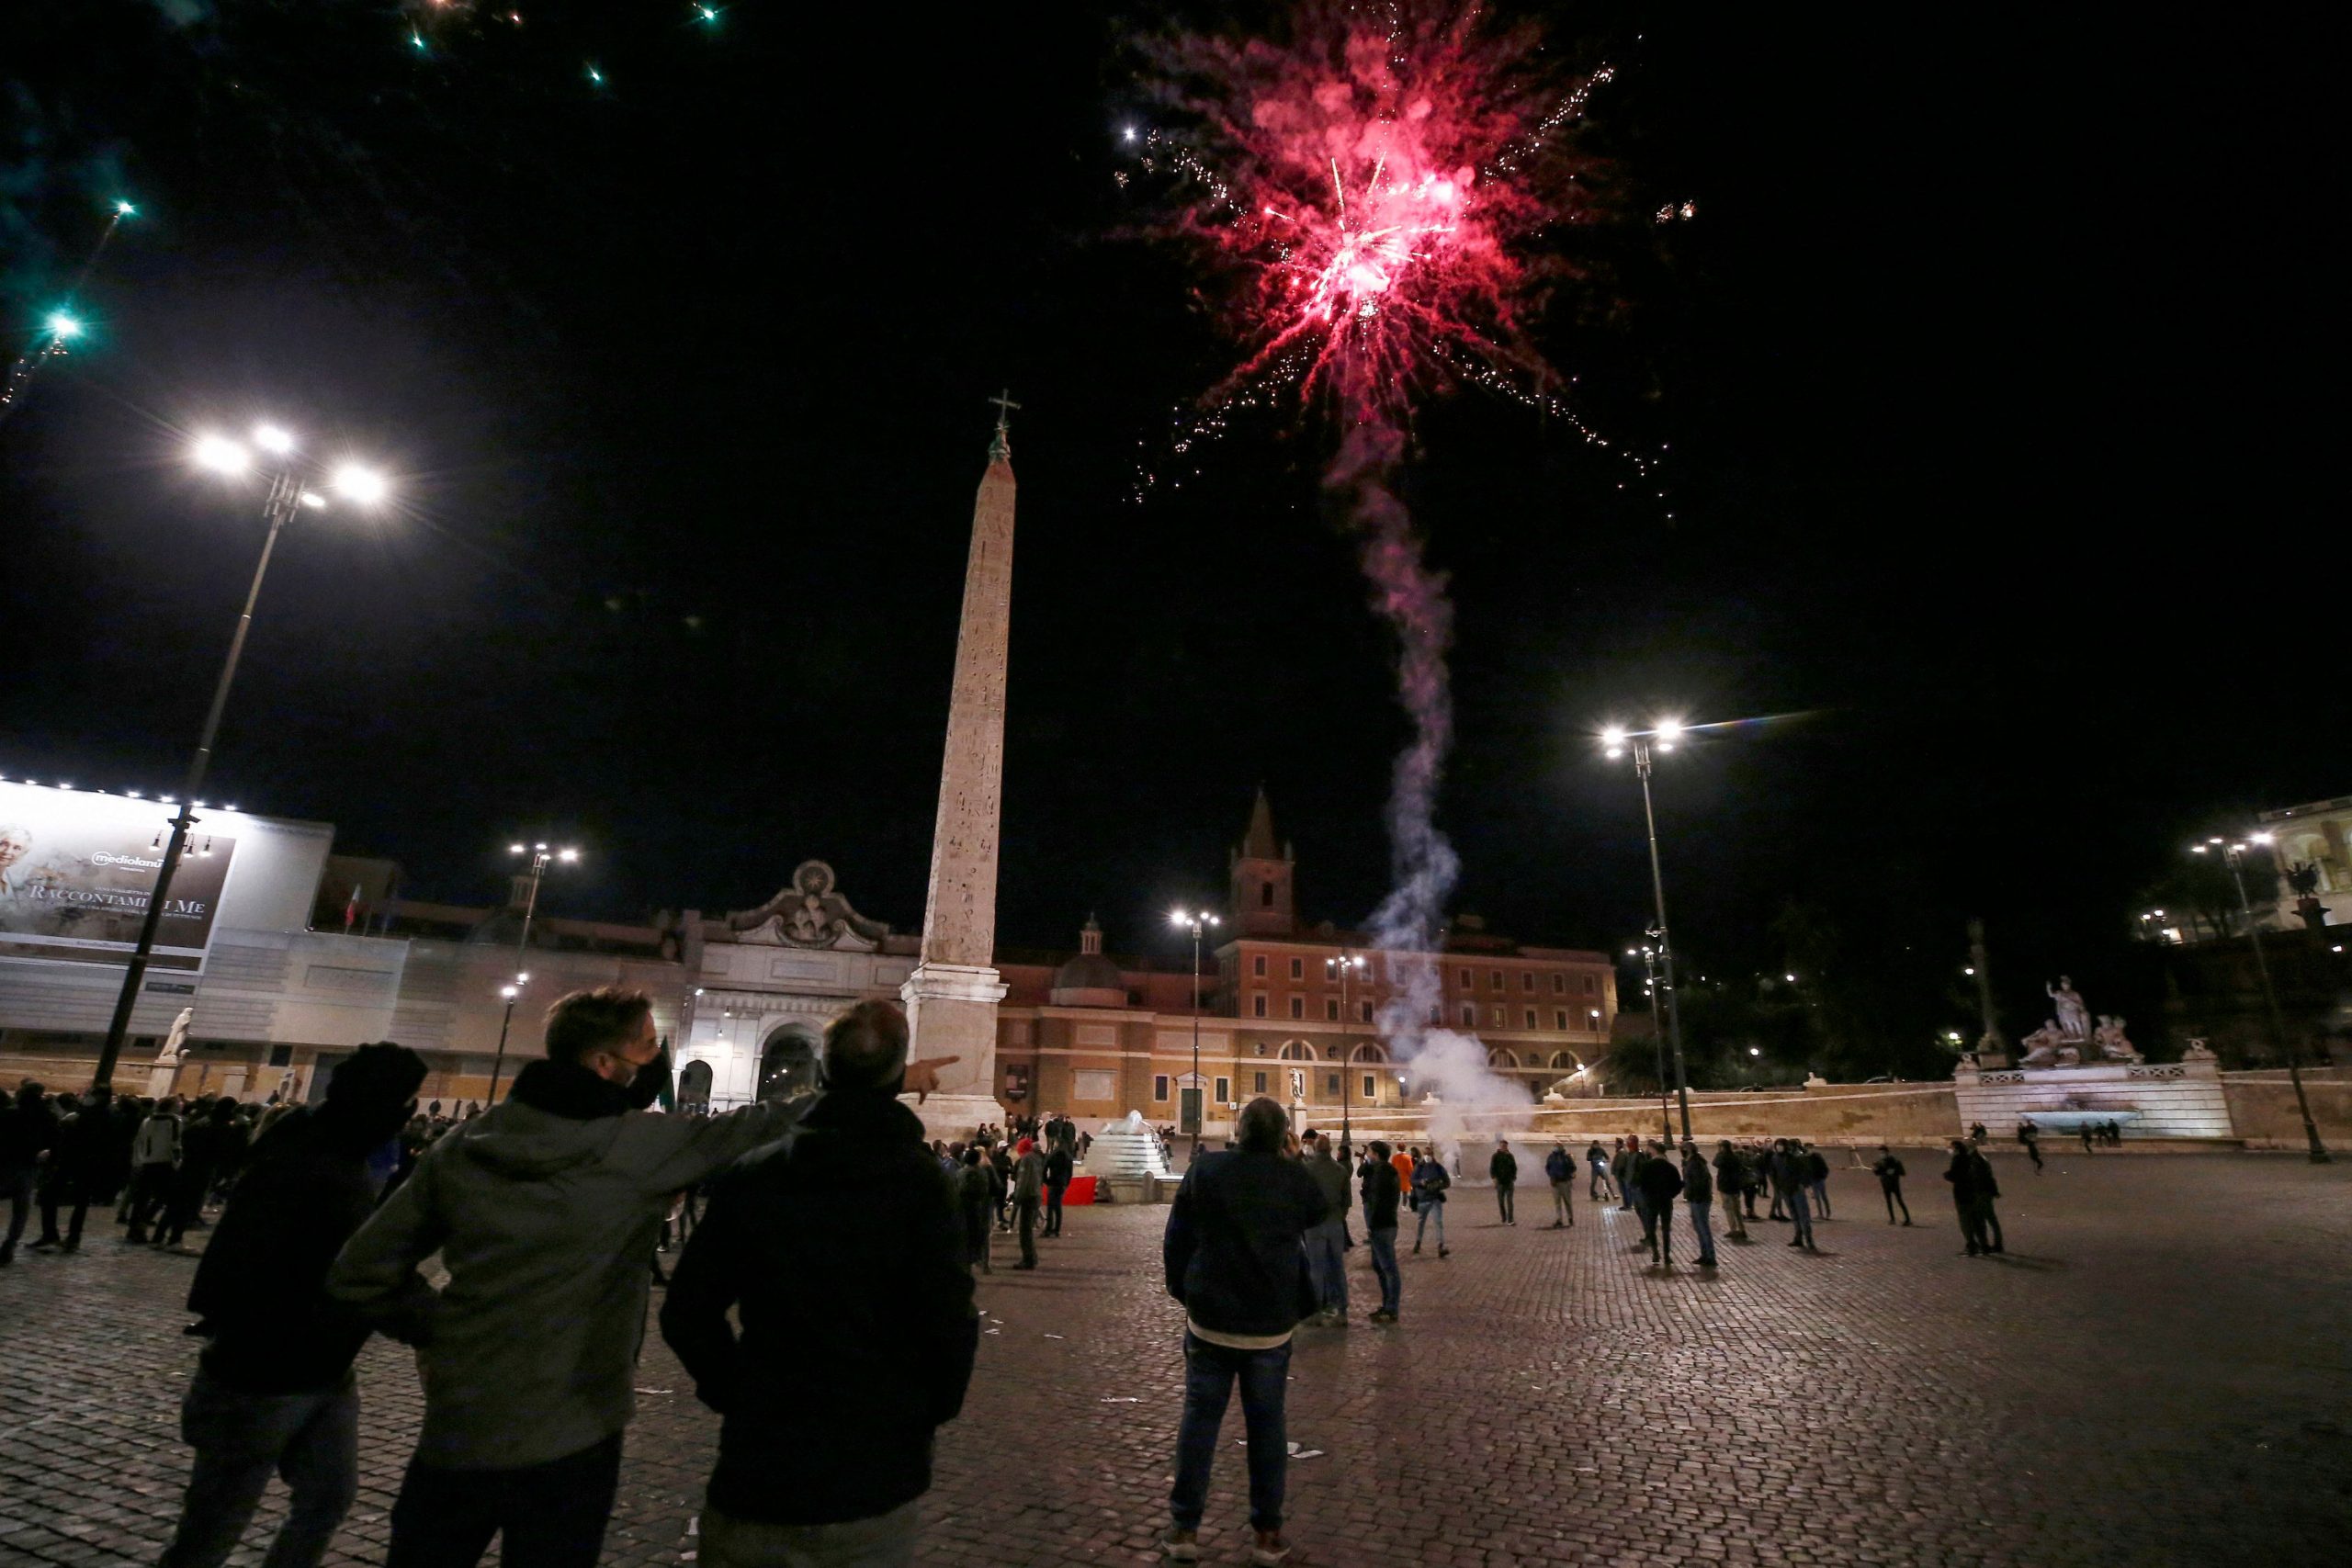 France to impose 8 pm curfew from December 15, including New Year’s Eve